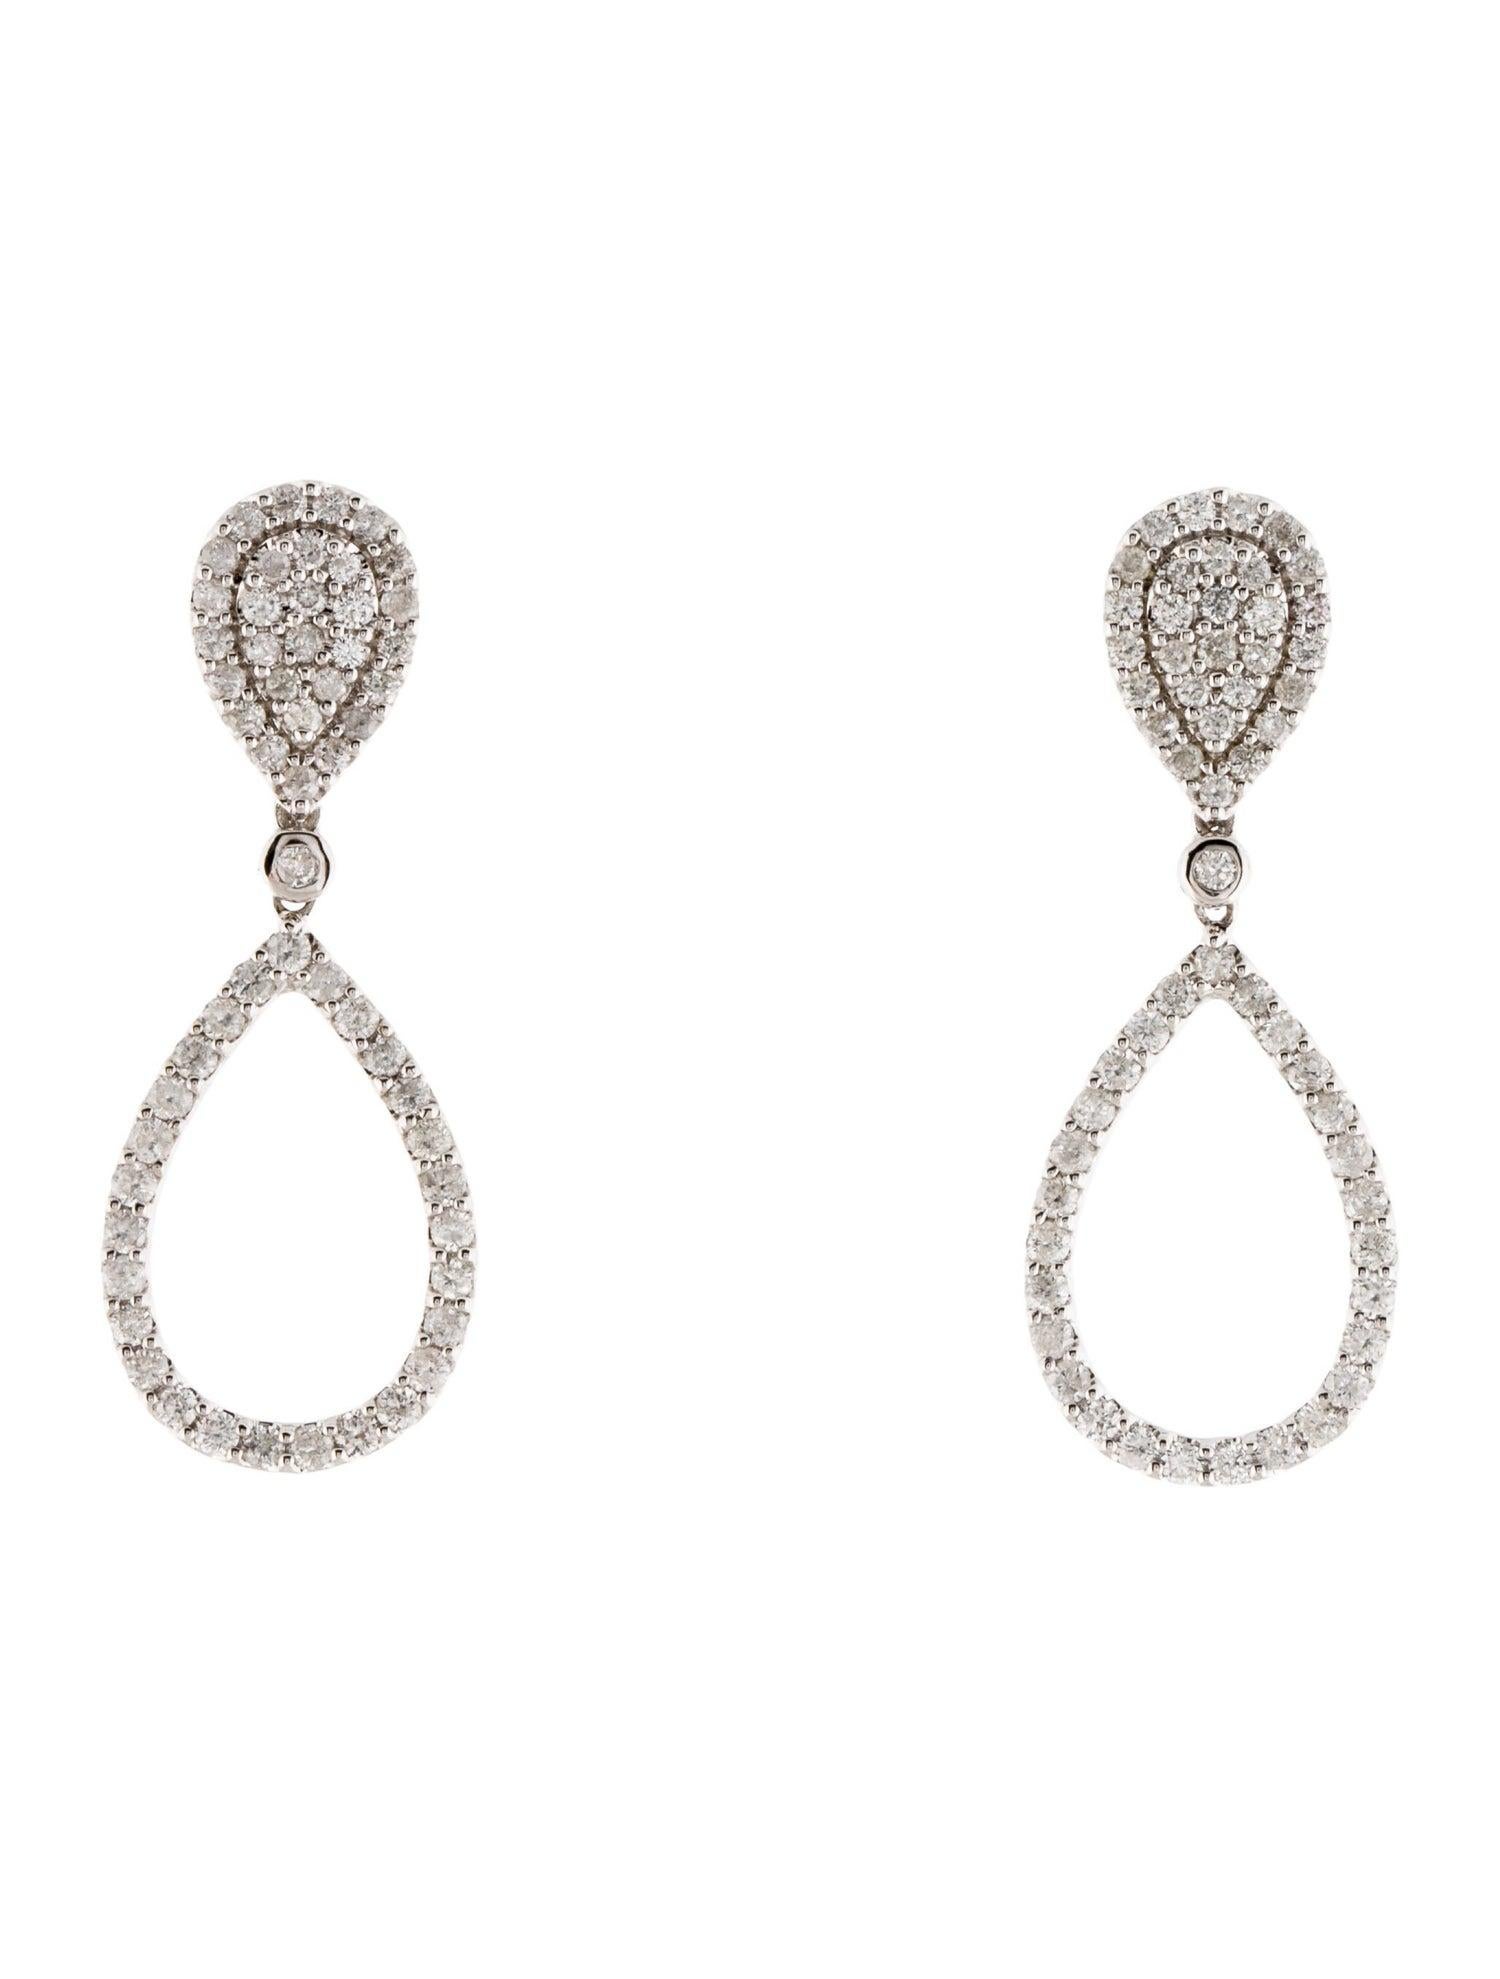 Experience the enchanting beauty of winter with our Snowflake Soirée Diamond Earrings, a testament to the delicate and unique intricacy of snowflakes. Each earring is meticulously handcrafted, allowing the sparkling white diamonds to shine in their